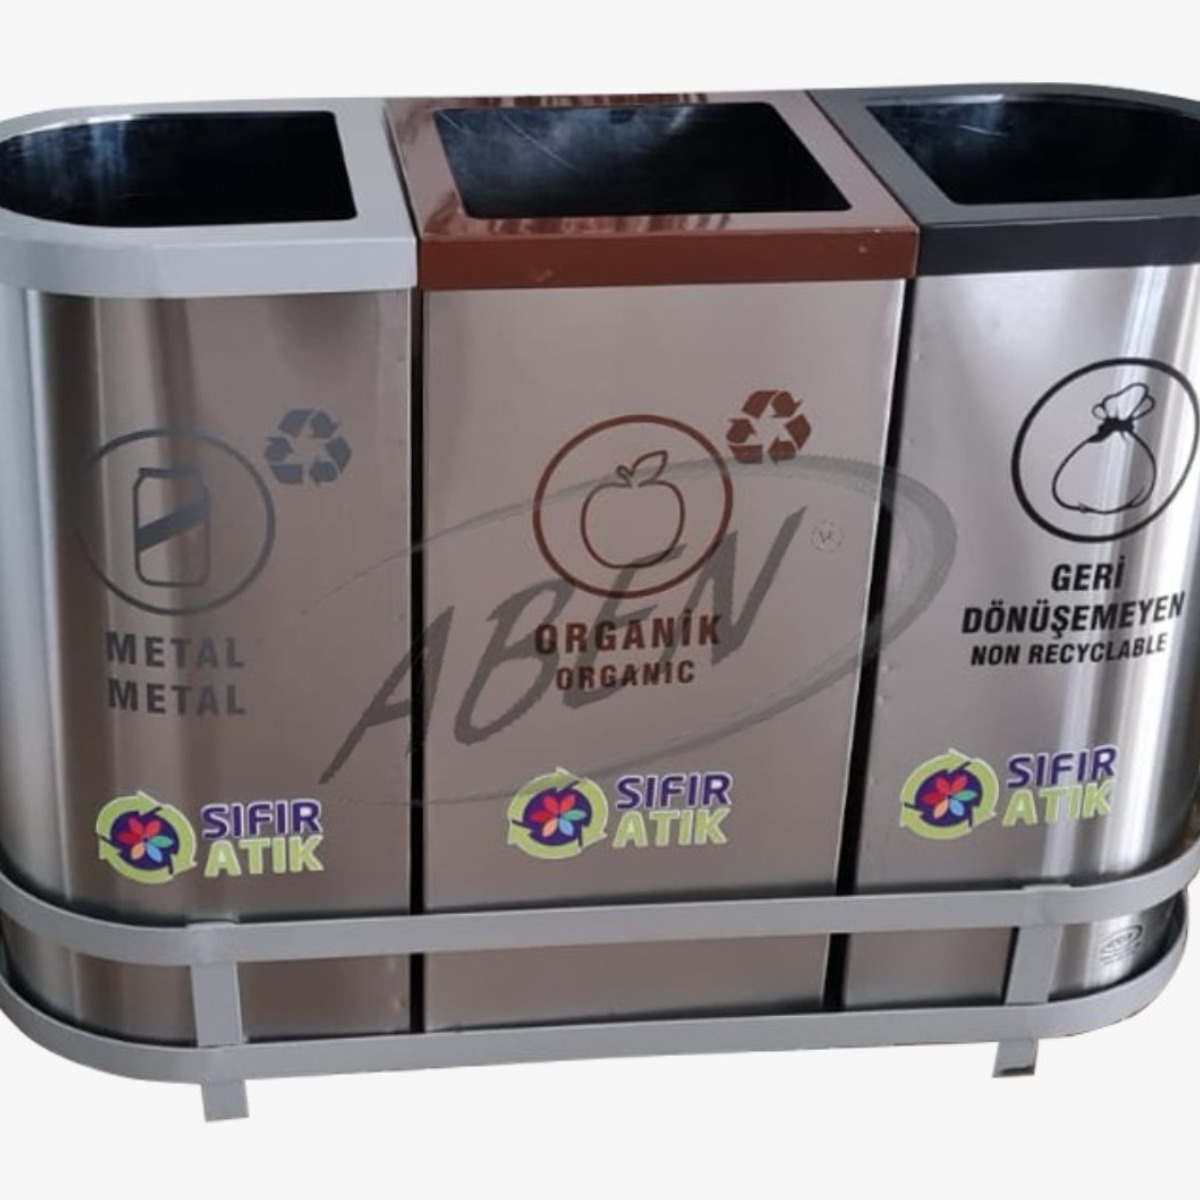 AB-790 3'Part Recycle Bin product logo